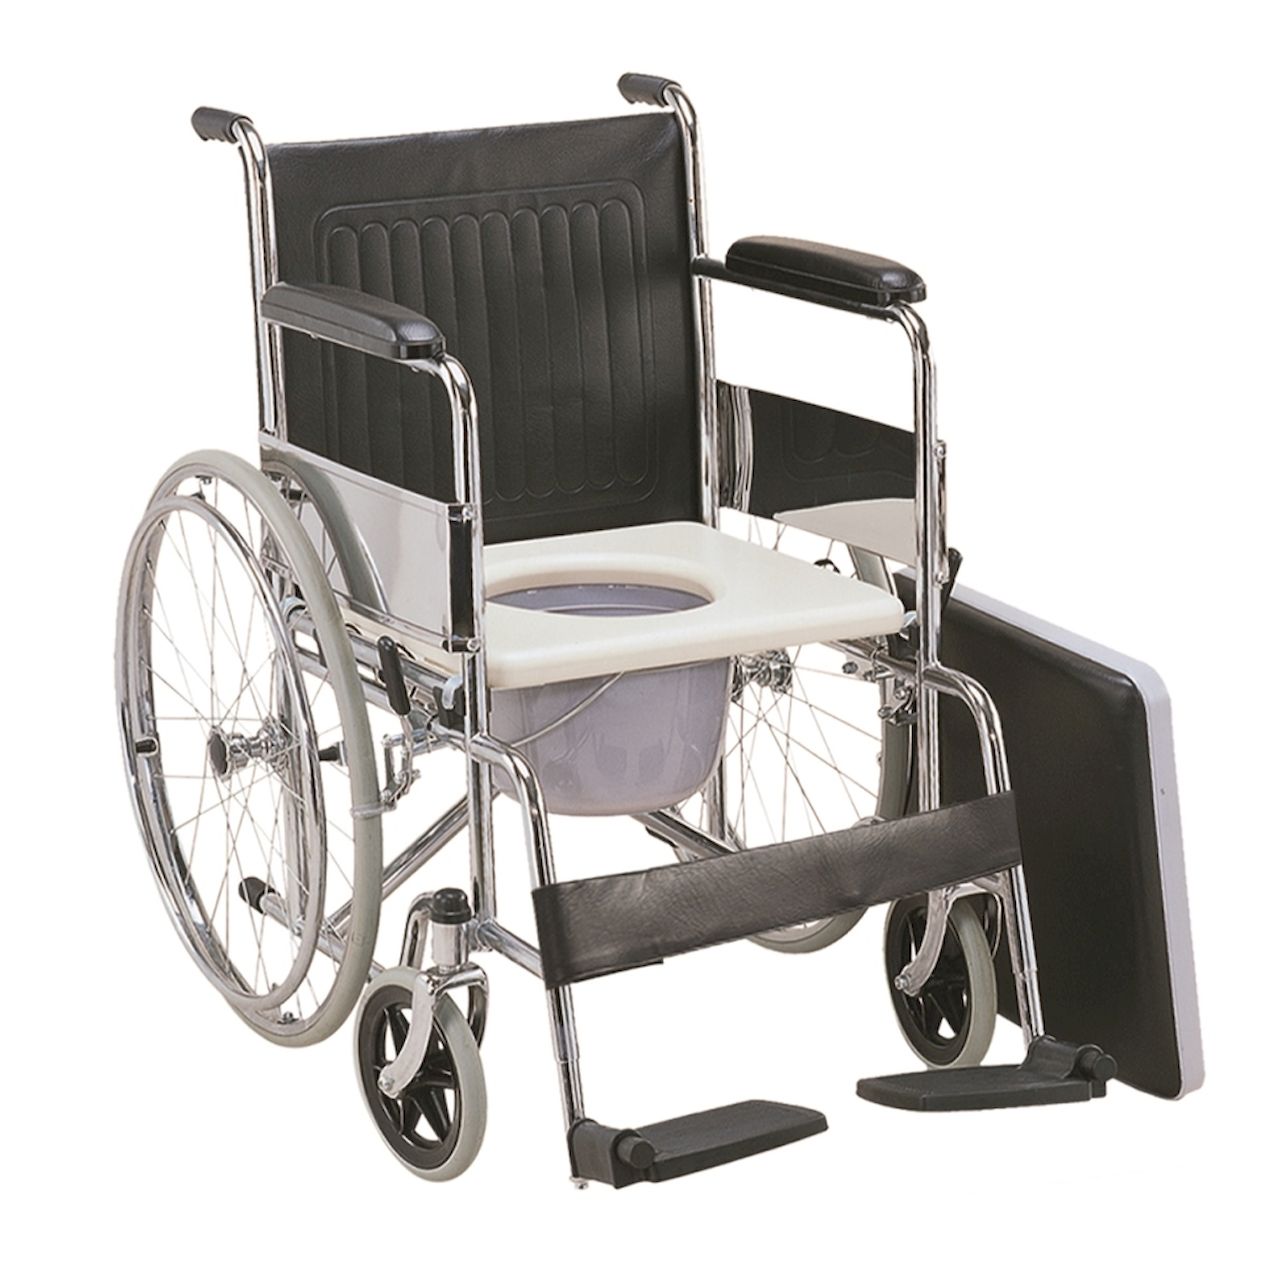 Karma Commode Wheelchair Rainbow 7 On Sale Suppliers, Service Provider in Central delhi